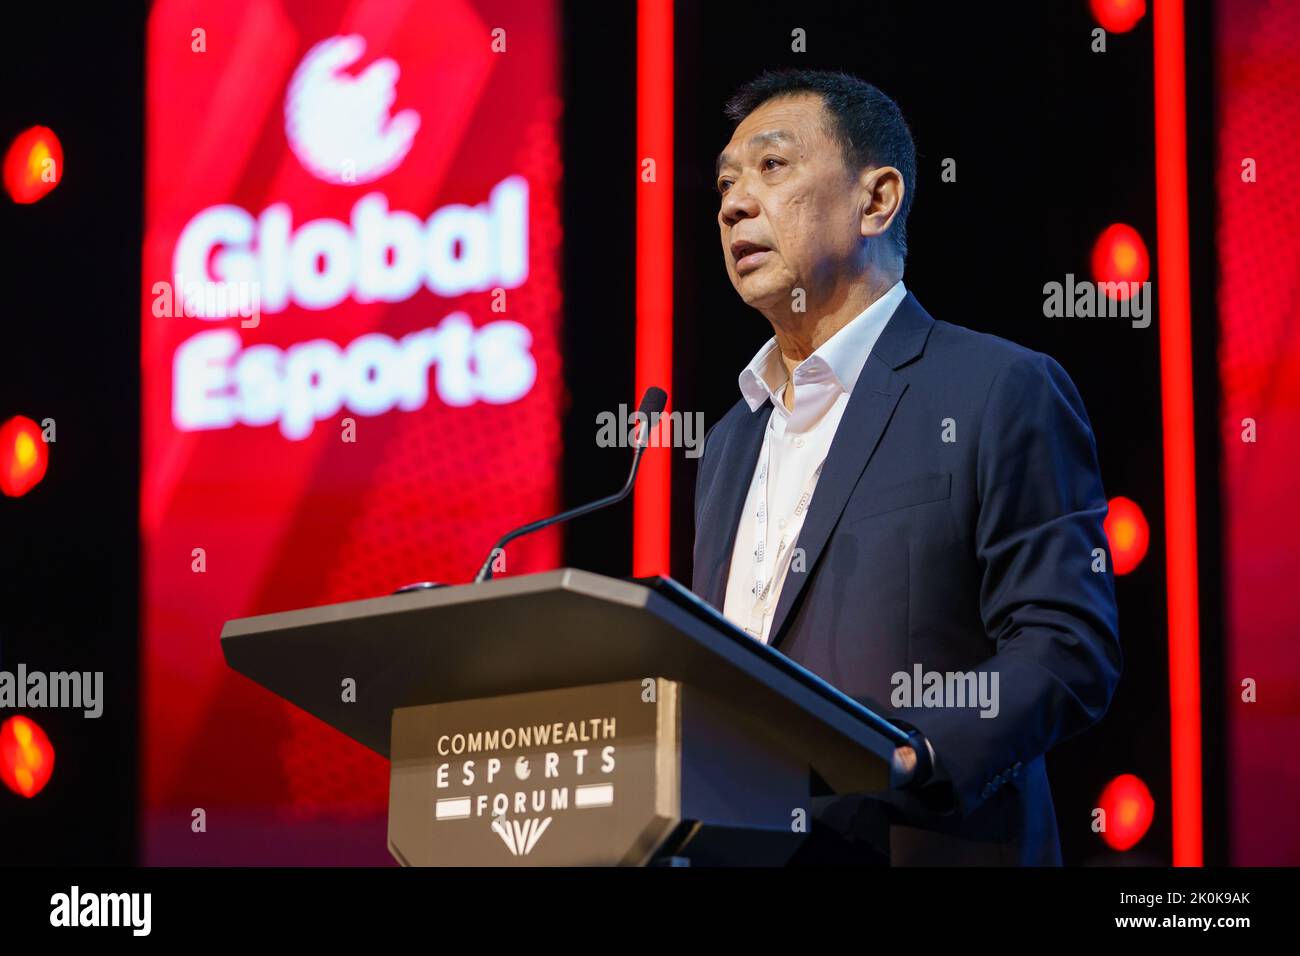 Chris Chan, President of the Global Esports Federation gives a speech at The Forum during the Commonwealth Esports Championships at the Birmingham ICC Stock Photo